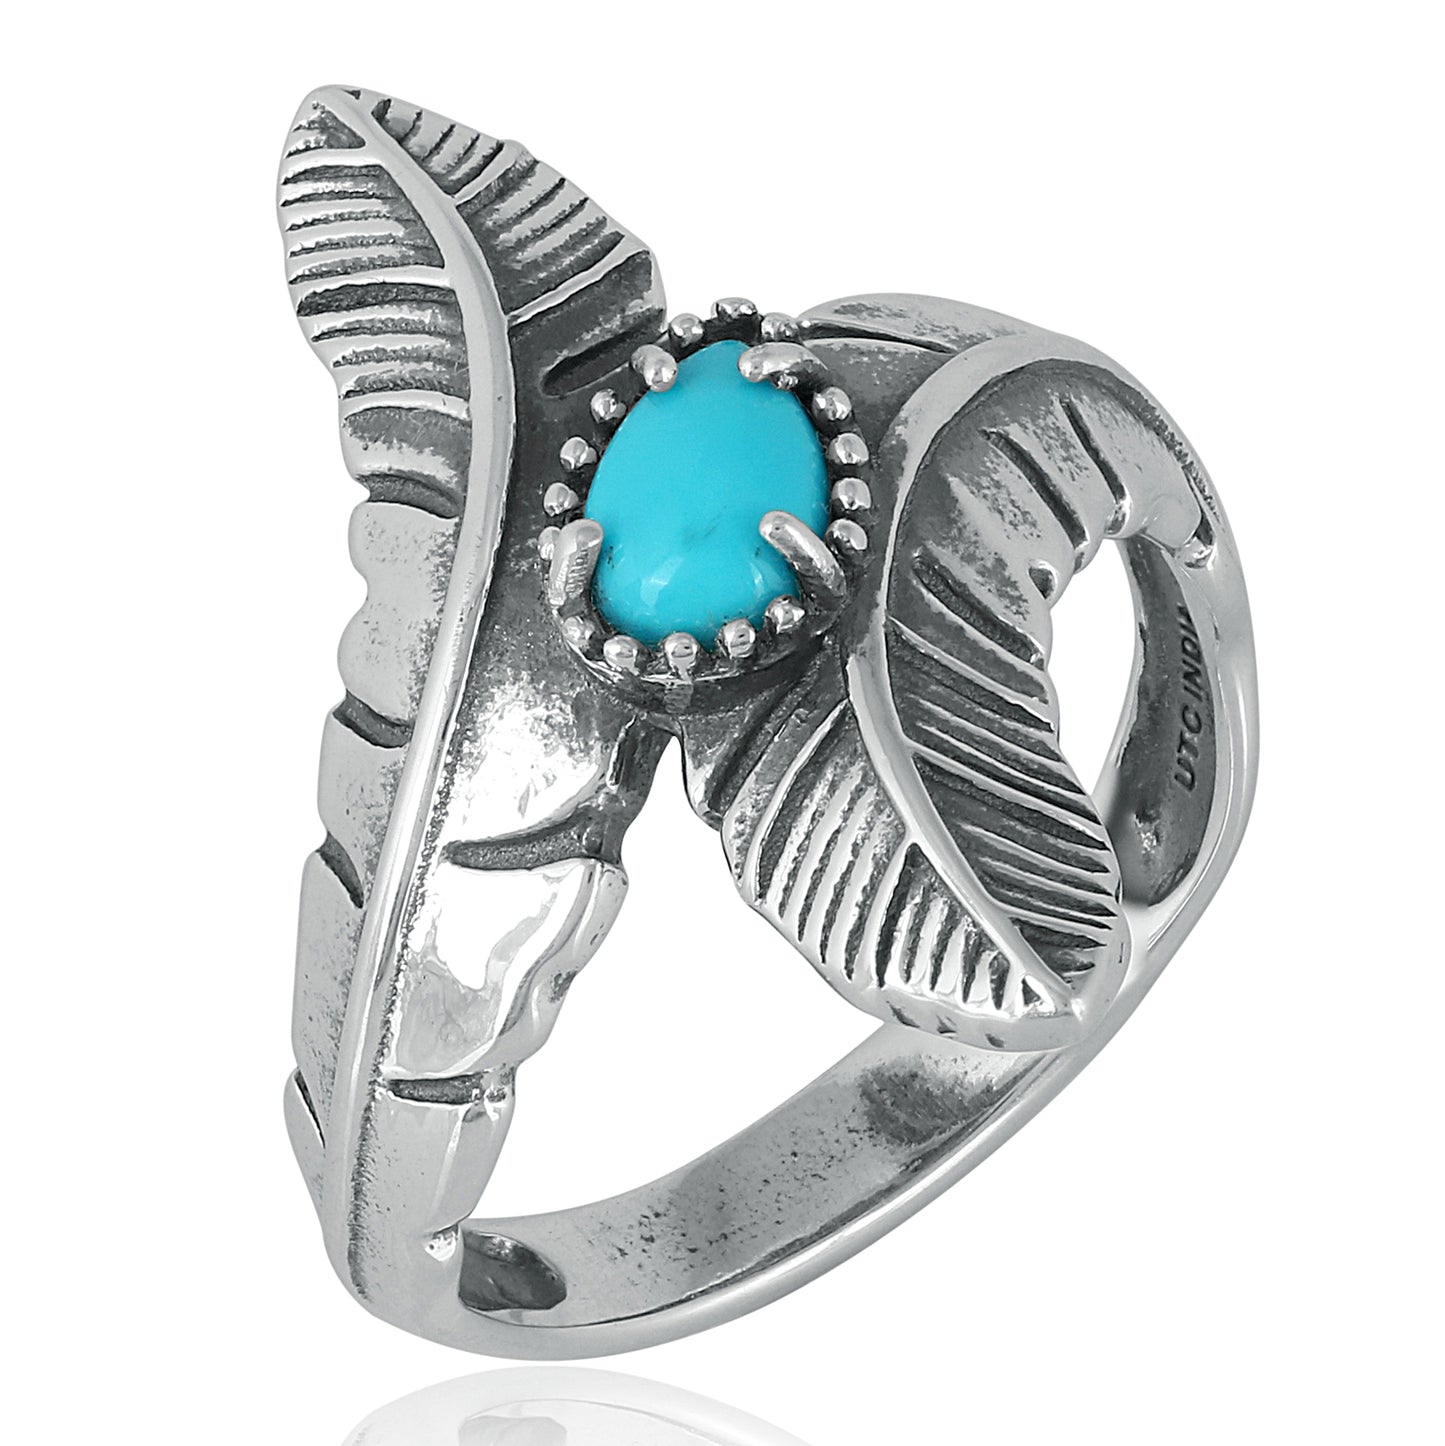 Southwestern Double Feather Ring-Sterling Silver Band with Blue Turquoise Gemstone, Sizes 5 - 7